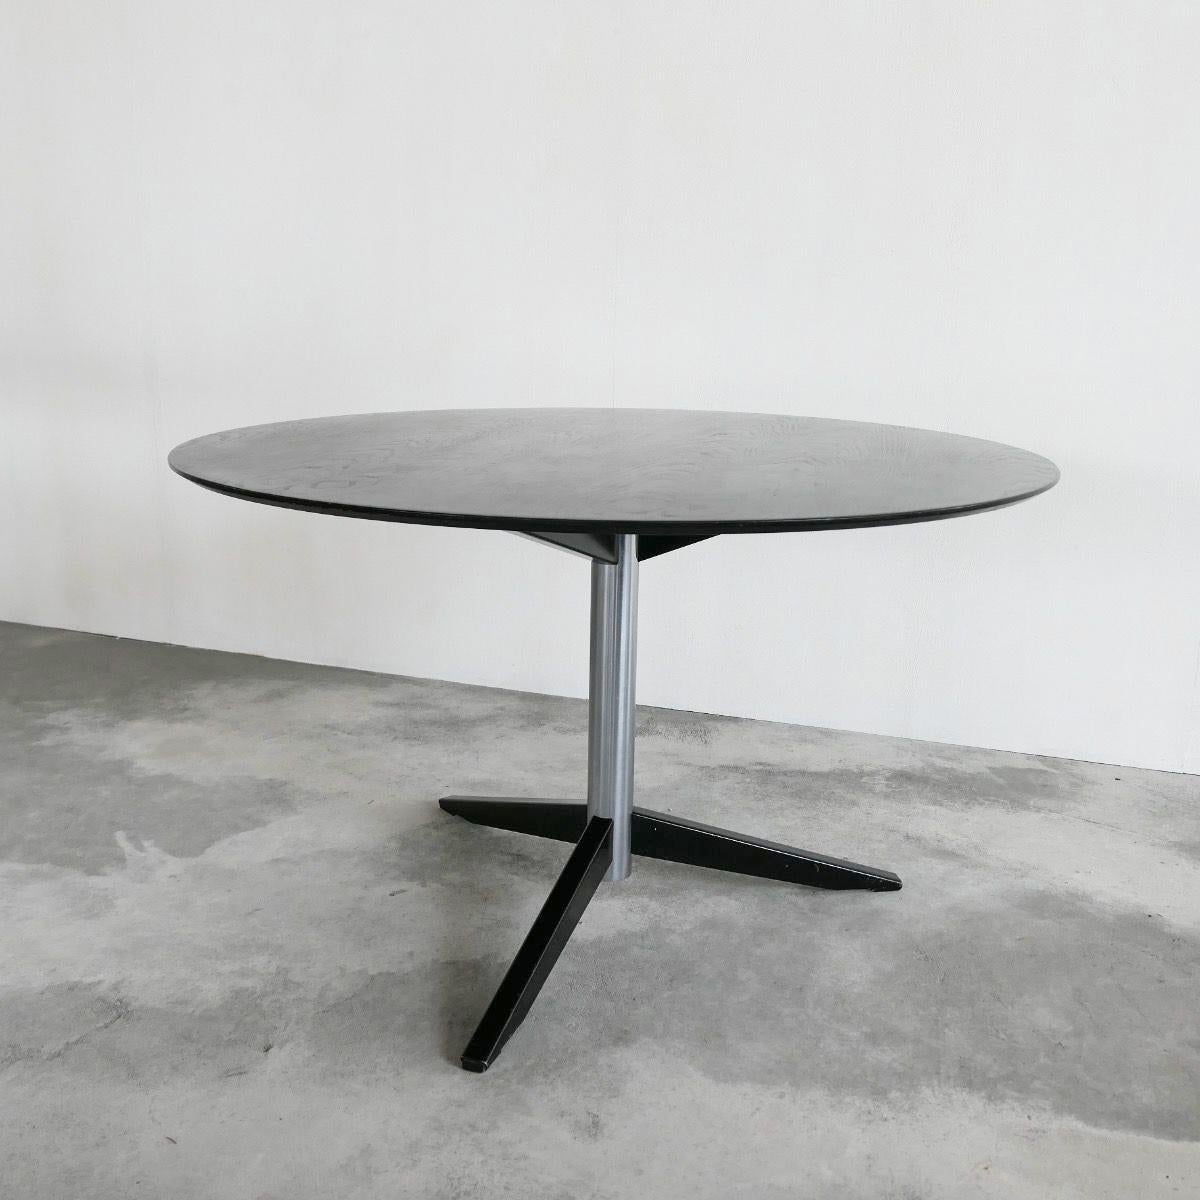 Martin Visser TE06 dining table for 't Spectrum, Bergeijk, The Netherlands, 1960.

Timeless dining table by Dutch designer Martin Visser for 't Spectrum. Model TE06 (TE stands for Tafel Eetkamer - table dining room). Great design with a central